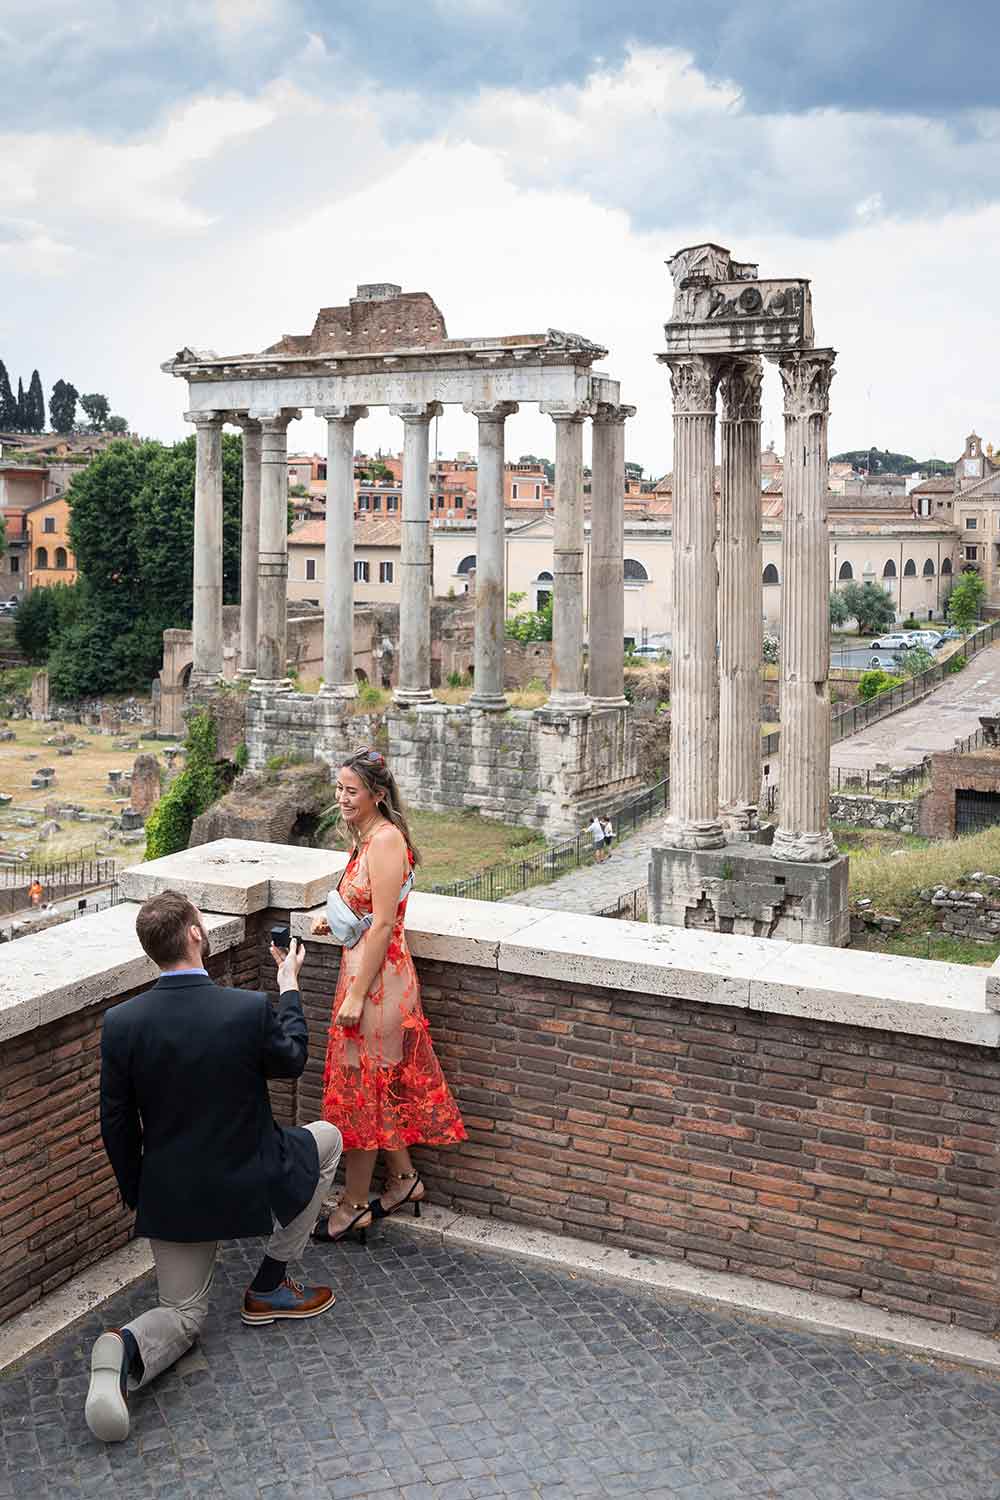 Roman Forum Proposal. Surprise Wedding Proposal candidly photographed from Piazza del Campidoglio in Rome overlooking the ancient forum monuments from a distance 